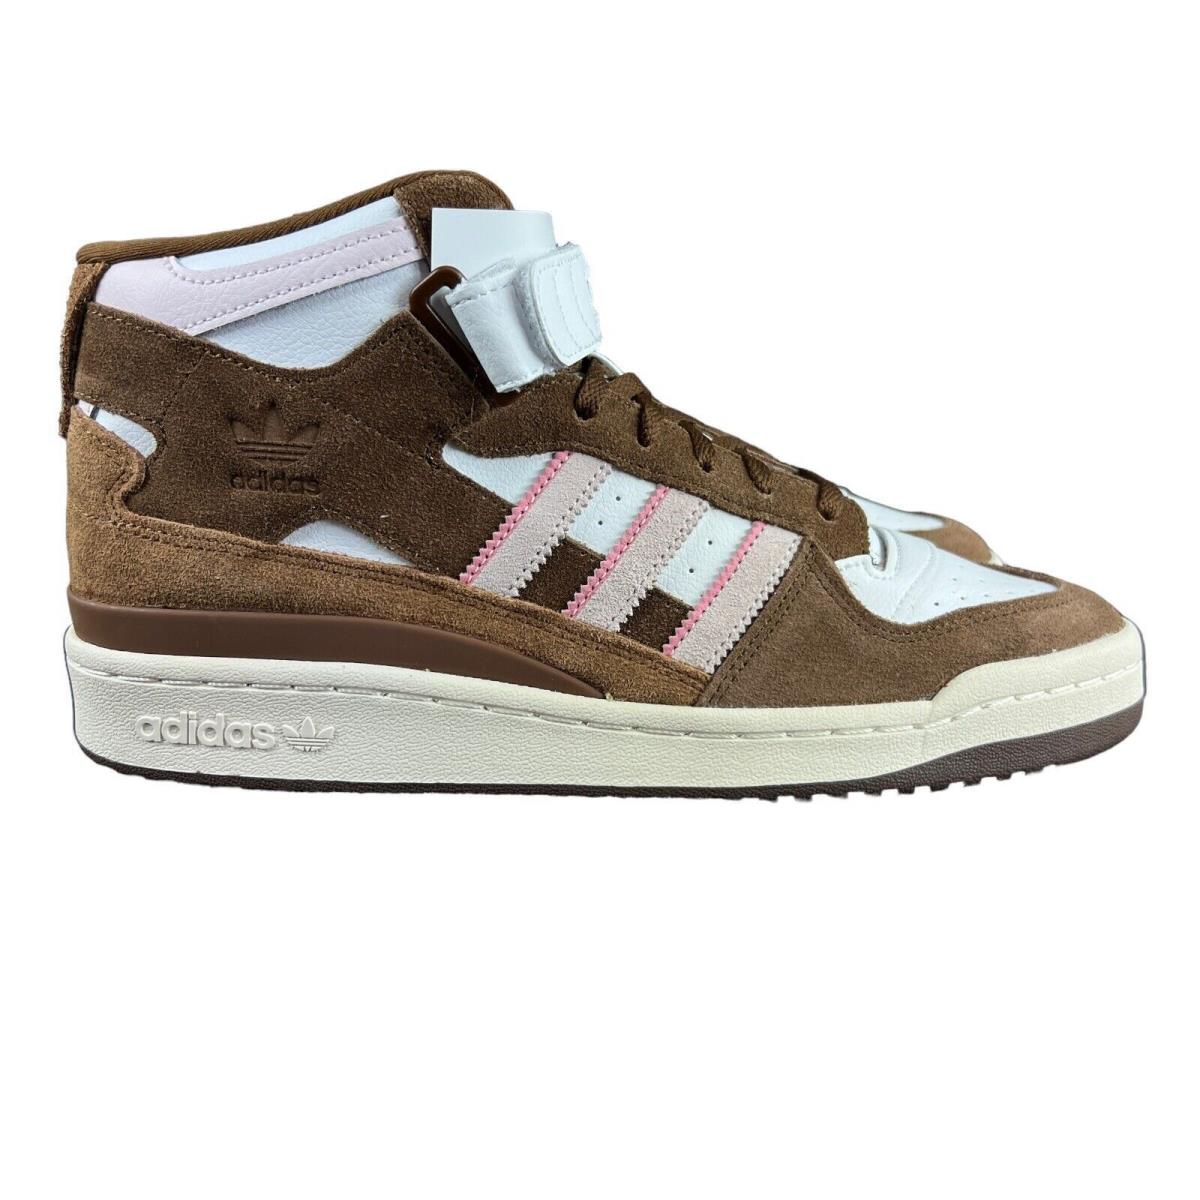 Adidas Forum Mid Chocolate To My Strawberry Brown Shoes GY6802 Men`s Sz 9 - 11.5